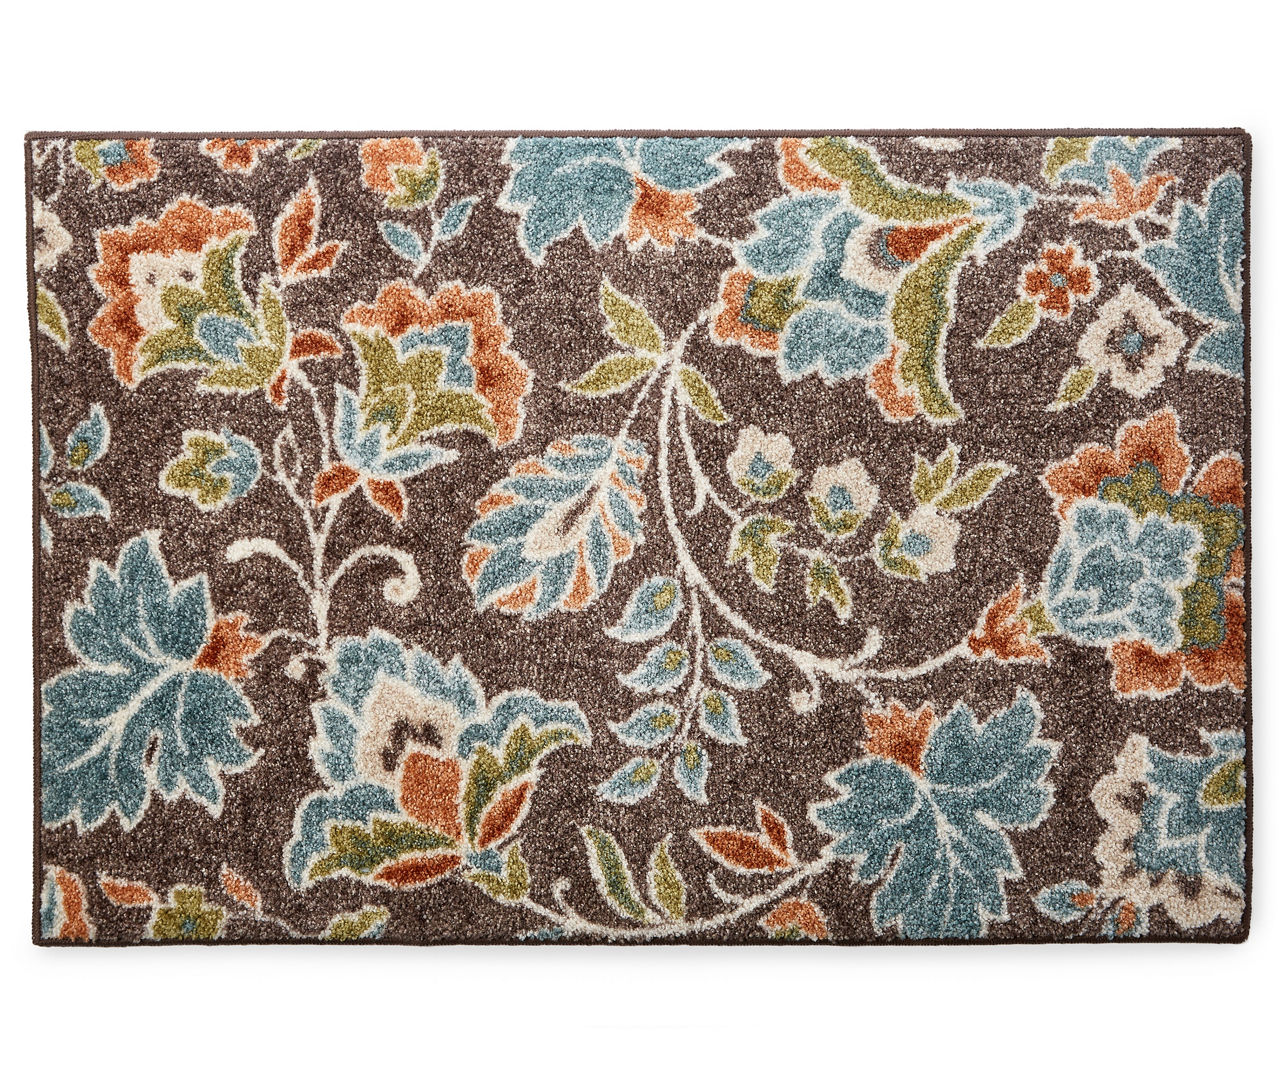 Medley Brown Jacobean Floral Accent Rug, (2'6" x 3'10")